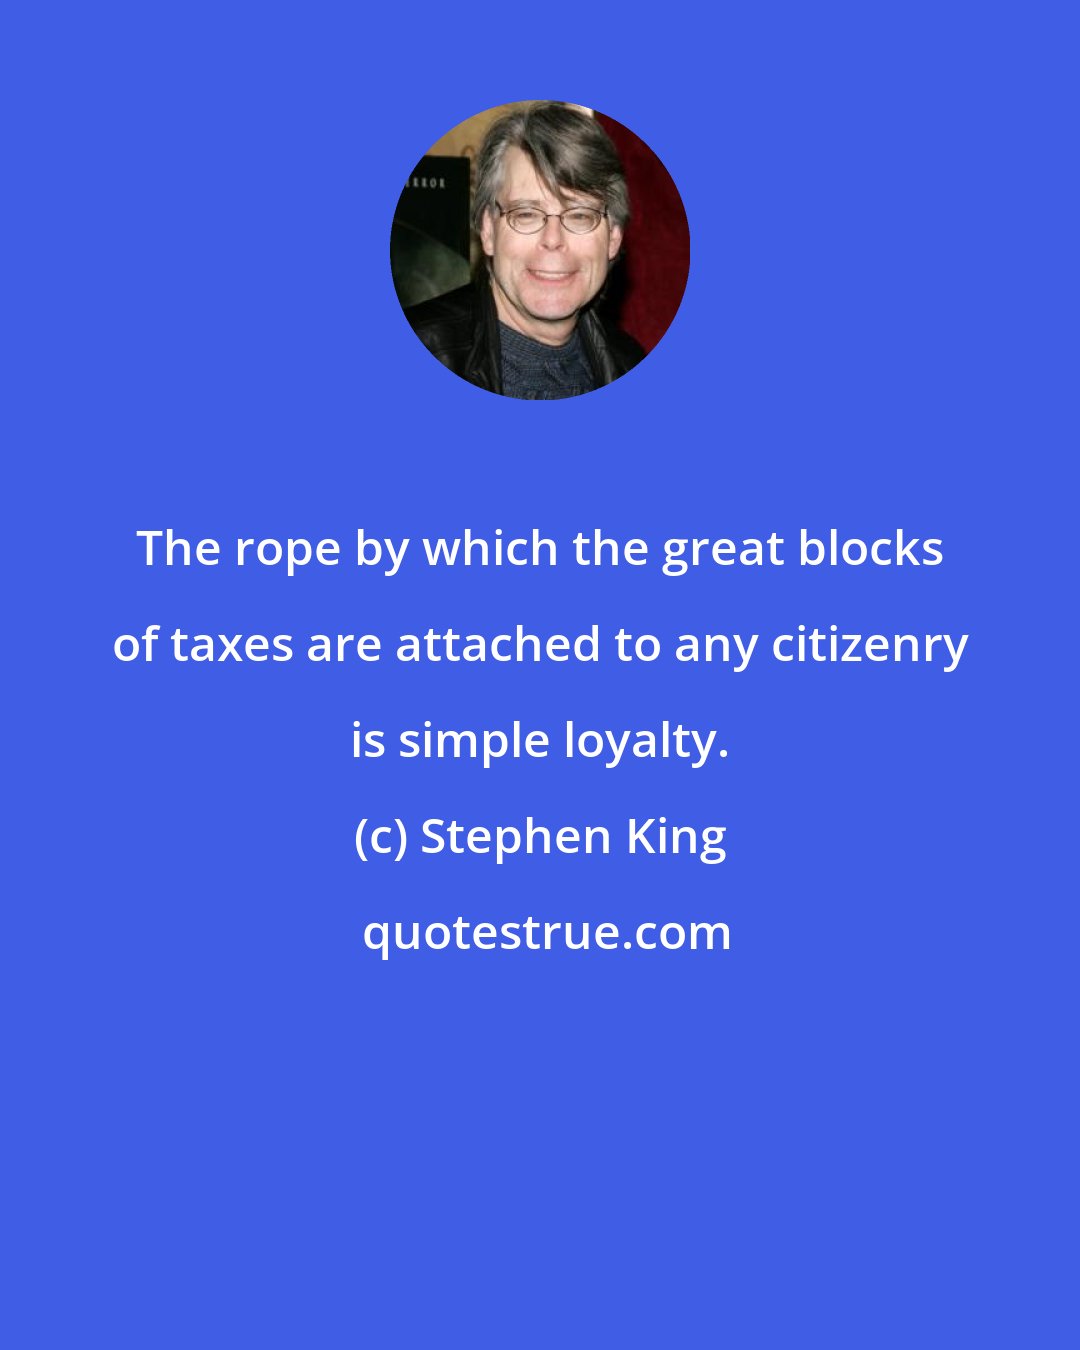 Stephen King: The rope by which the great blocks of taxes are attached to any citizenry is simple loyalty.